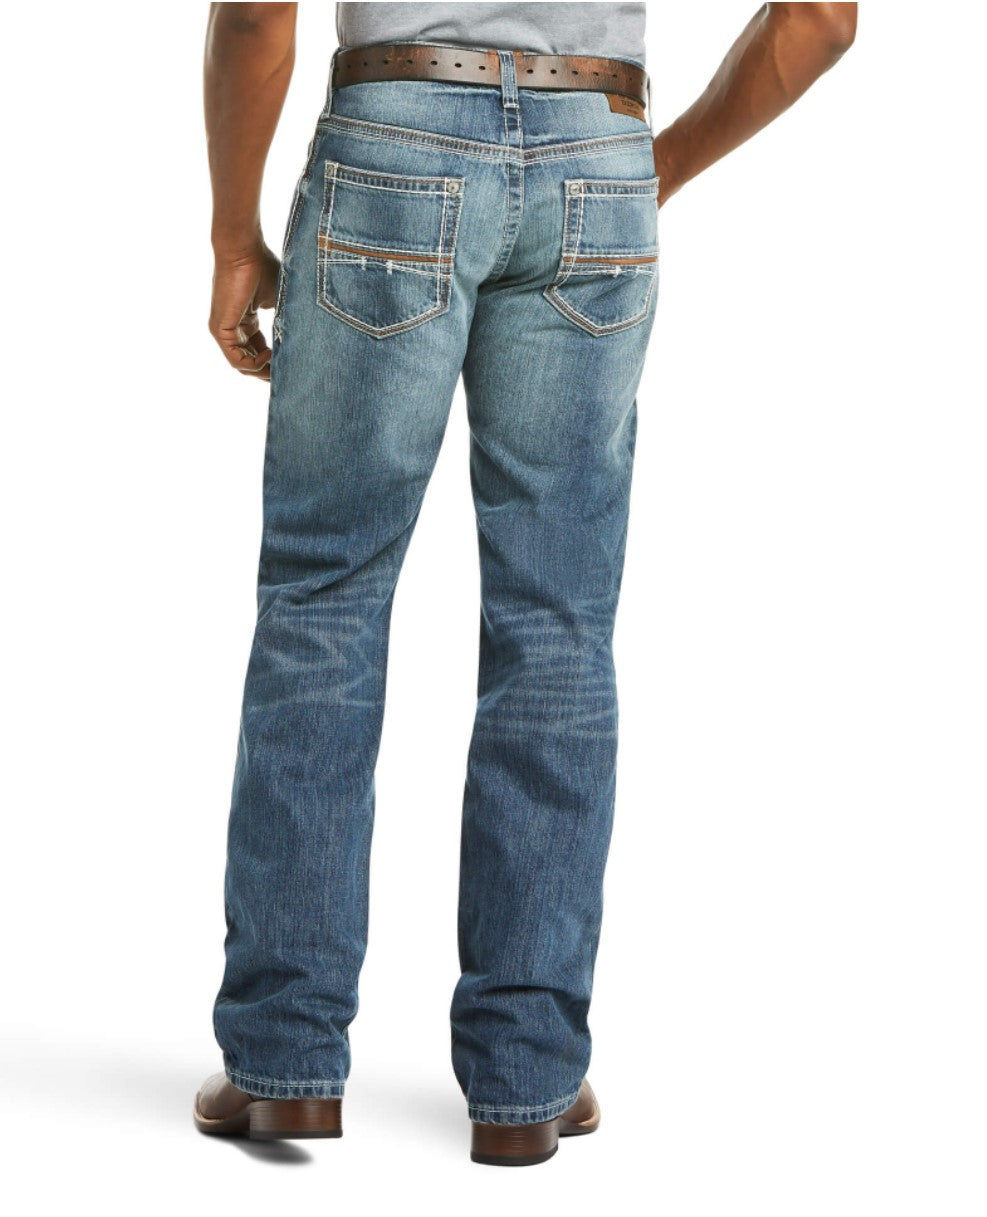 Men's Jeans & Pants – Boot Country